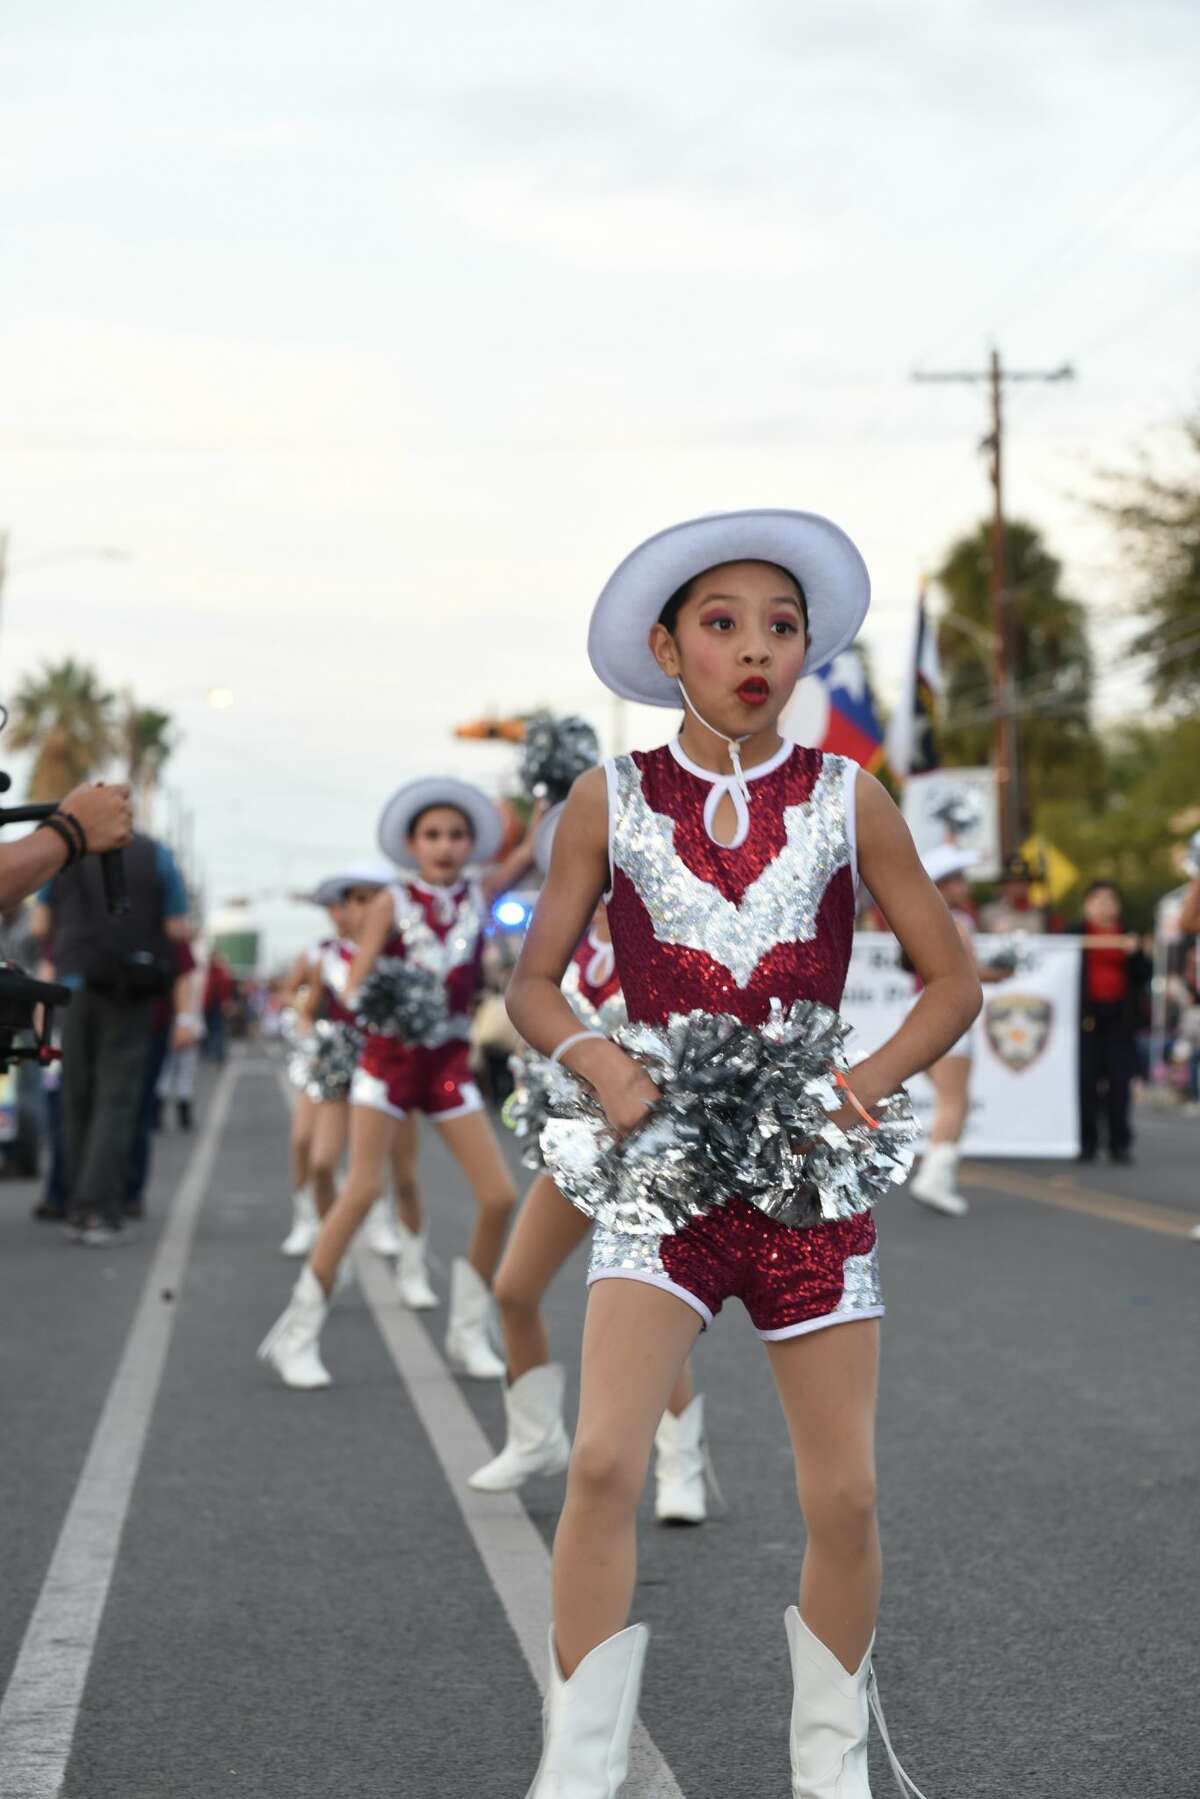 The IBC Youth Parade Under the Stars featured schools and sponsors during its run through San Bernardo Ave, Thursday, February 21, 2019.